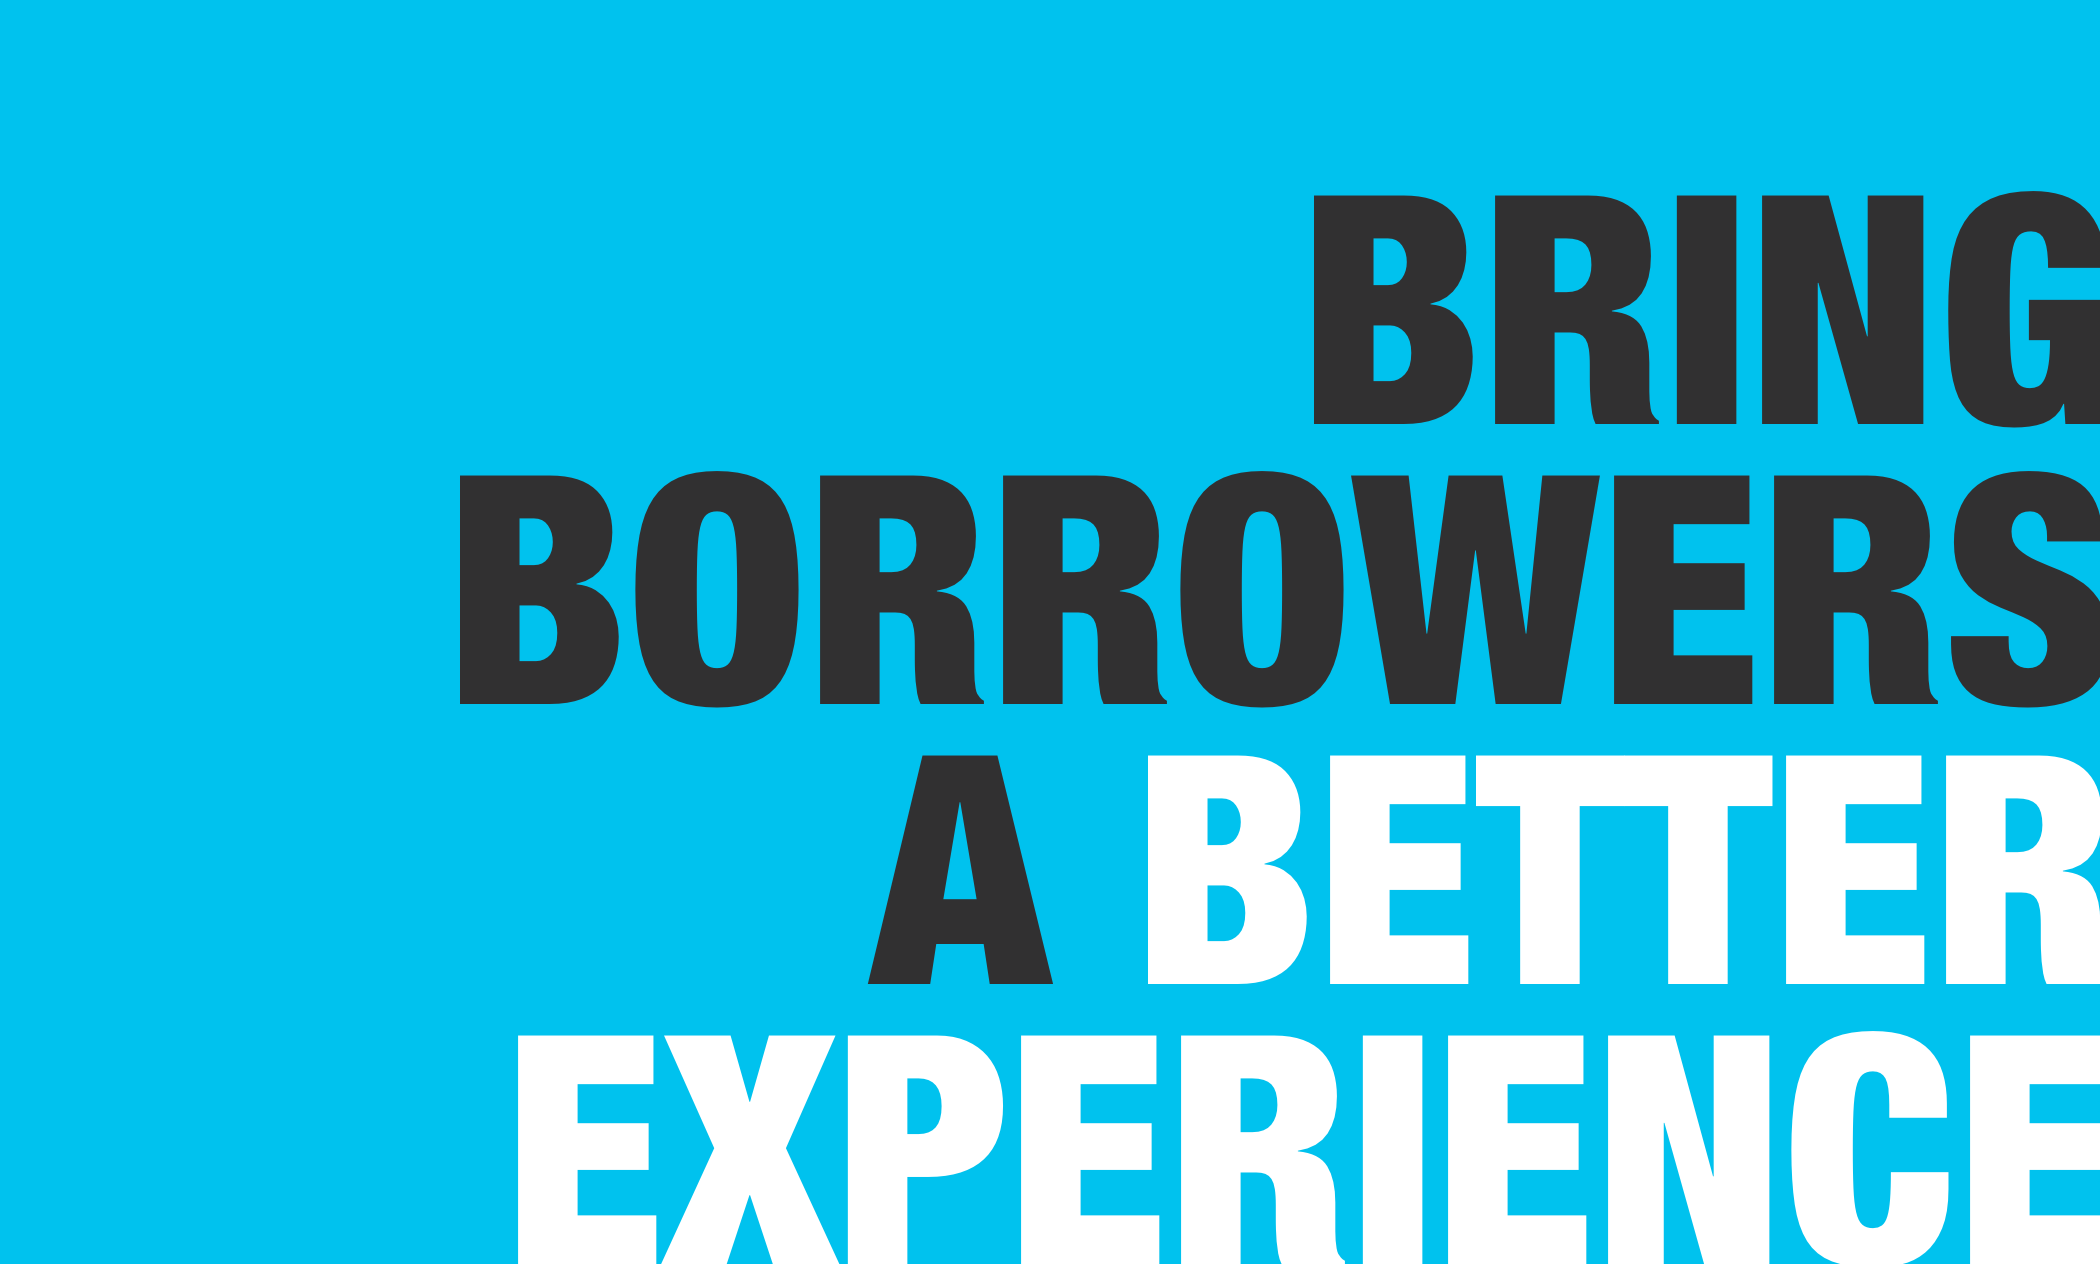 Bring borrowers a better experience